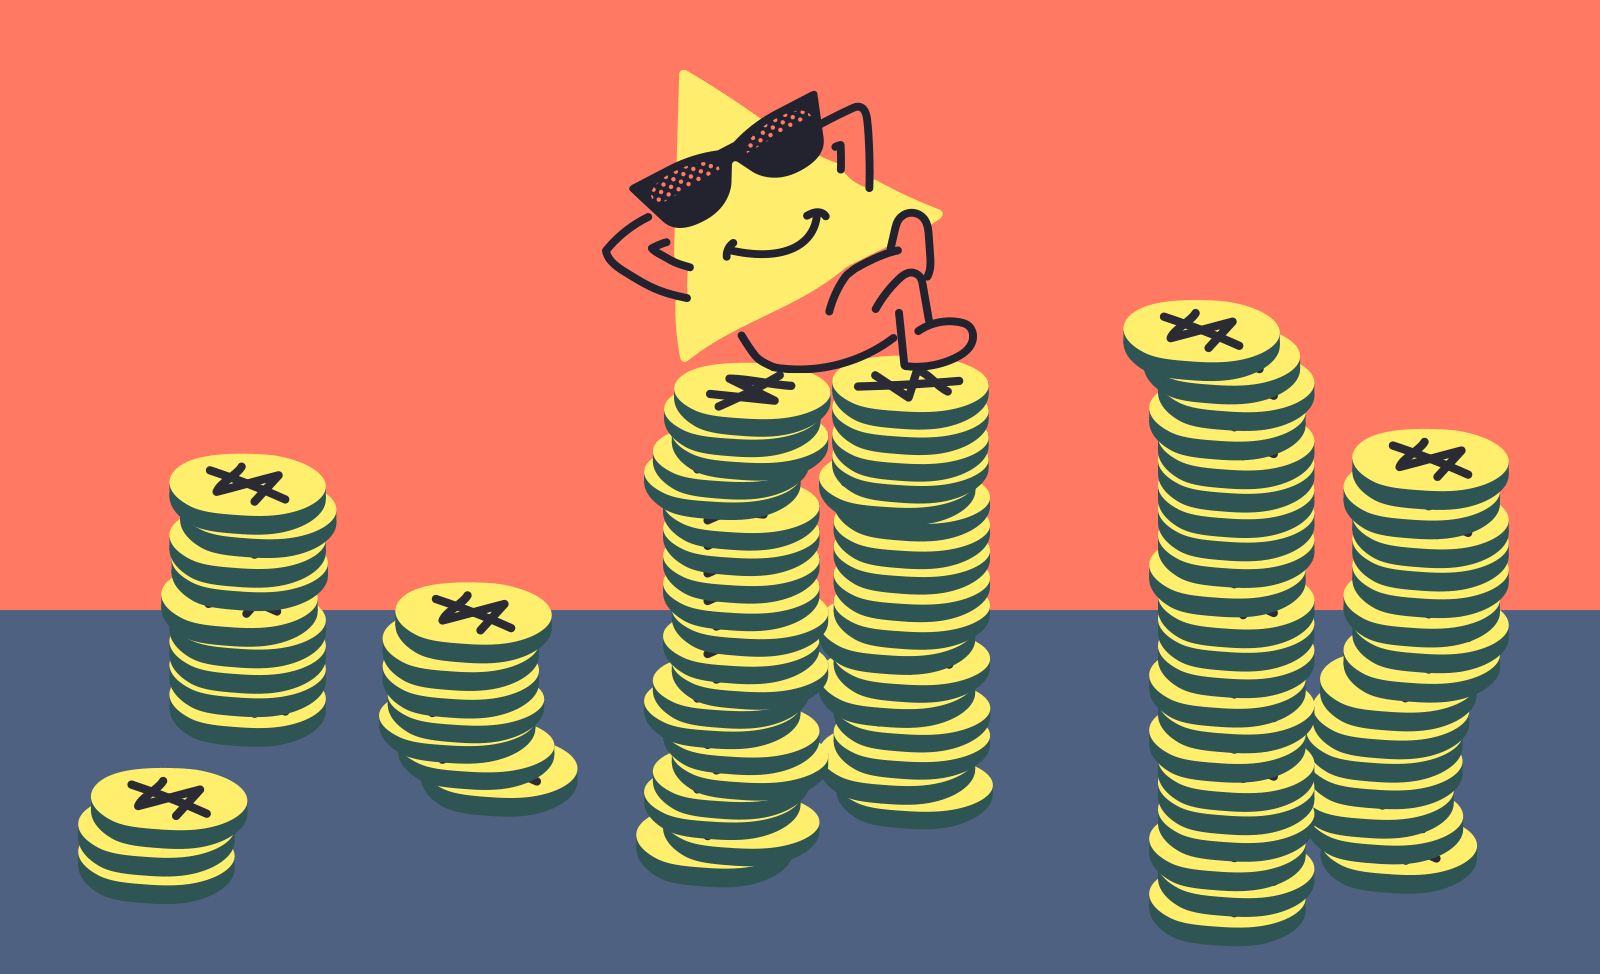 Zap chilling with piles of coins